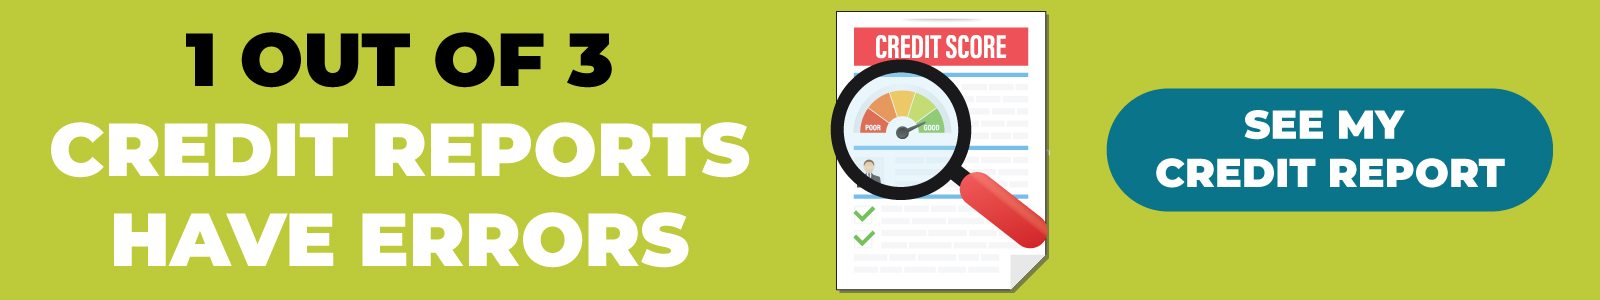 1 out of 3 credit reports have errors - see my credit report